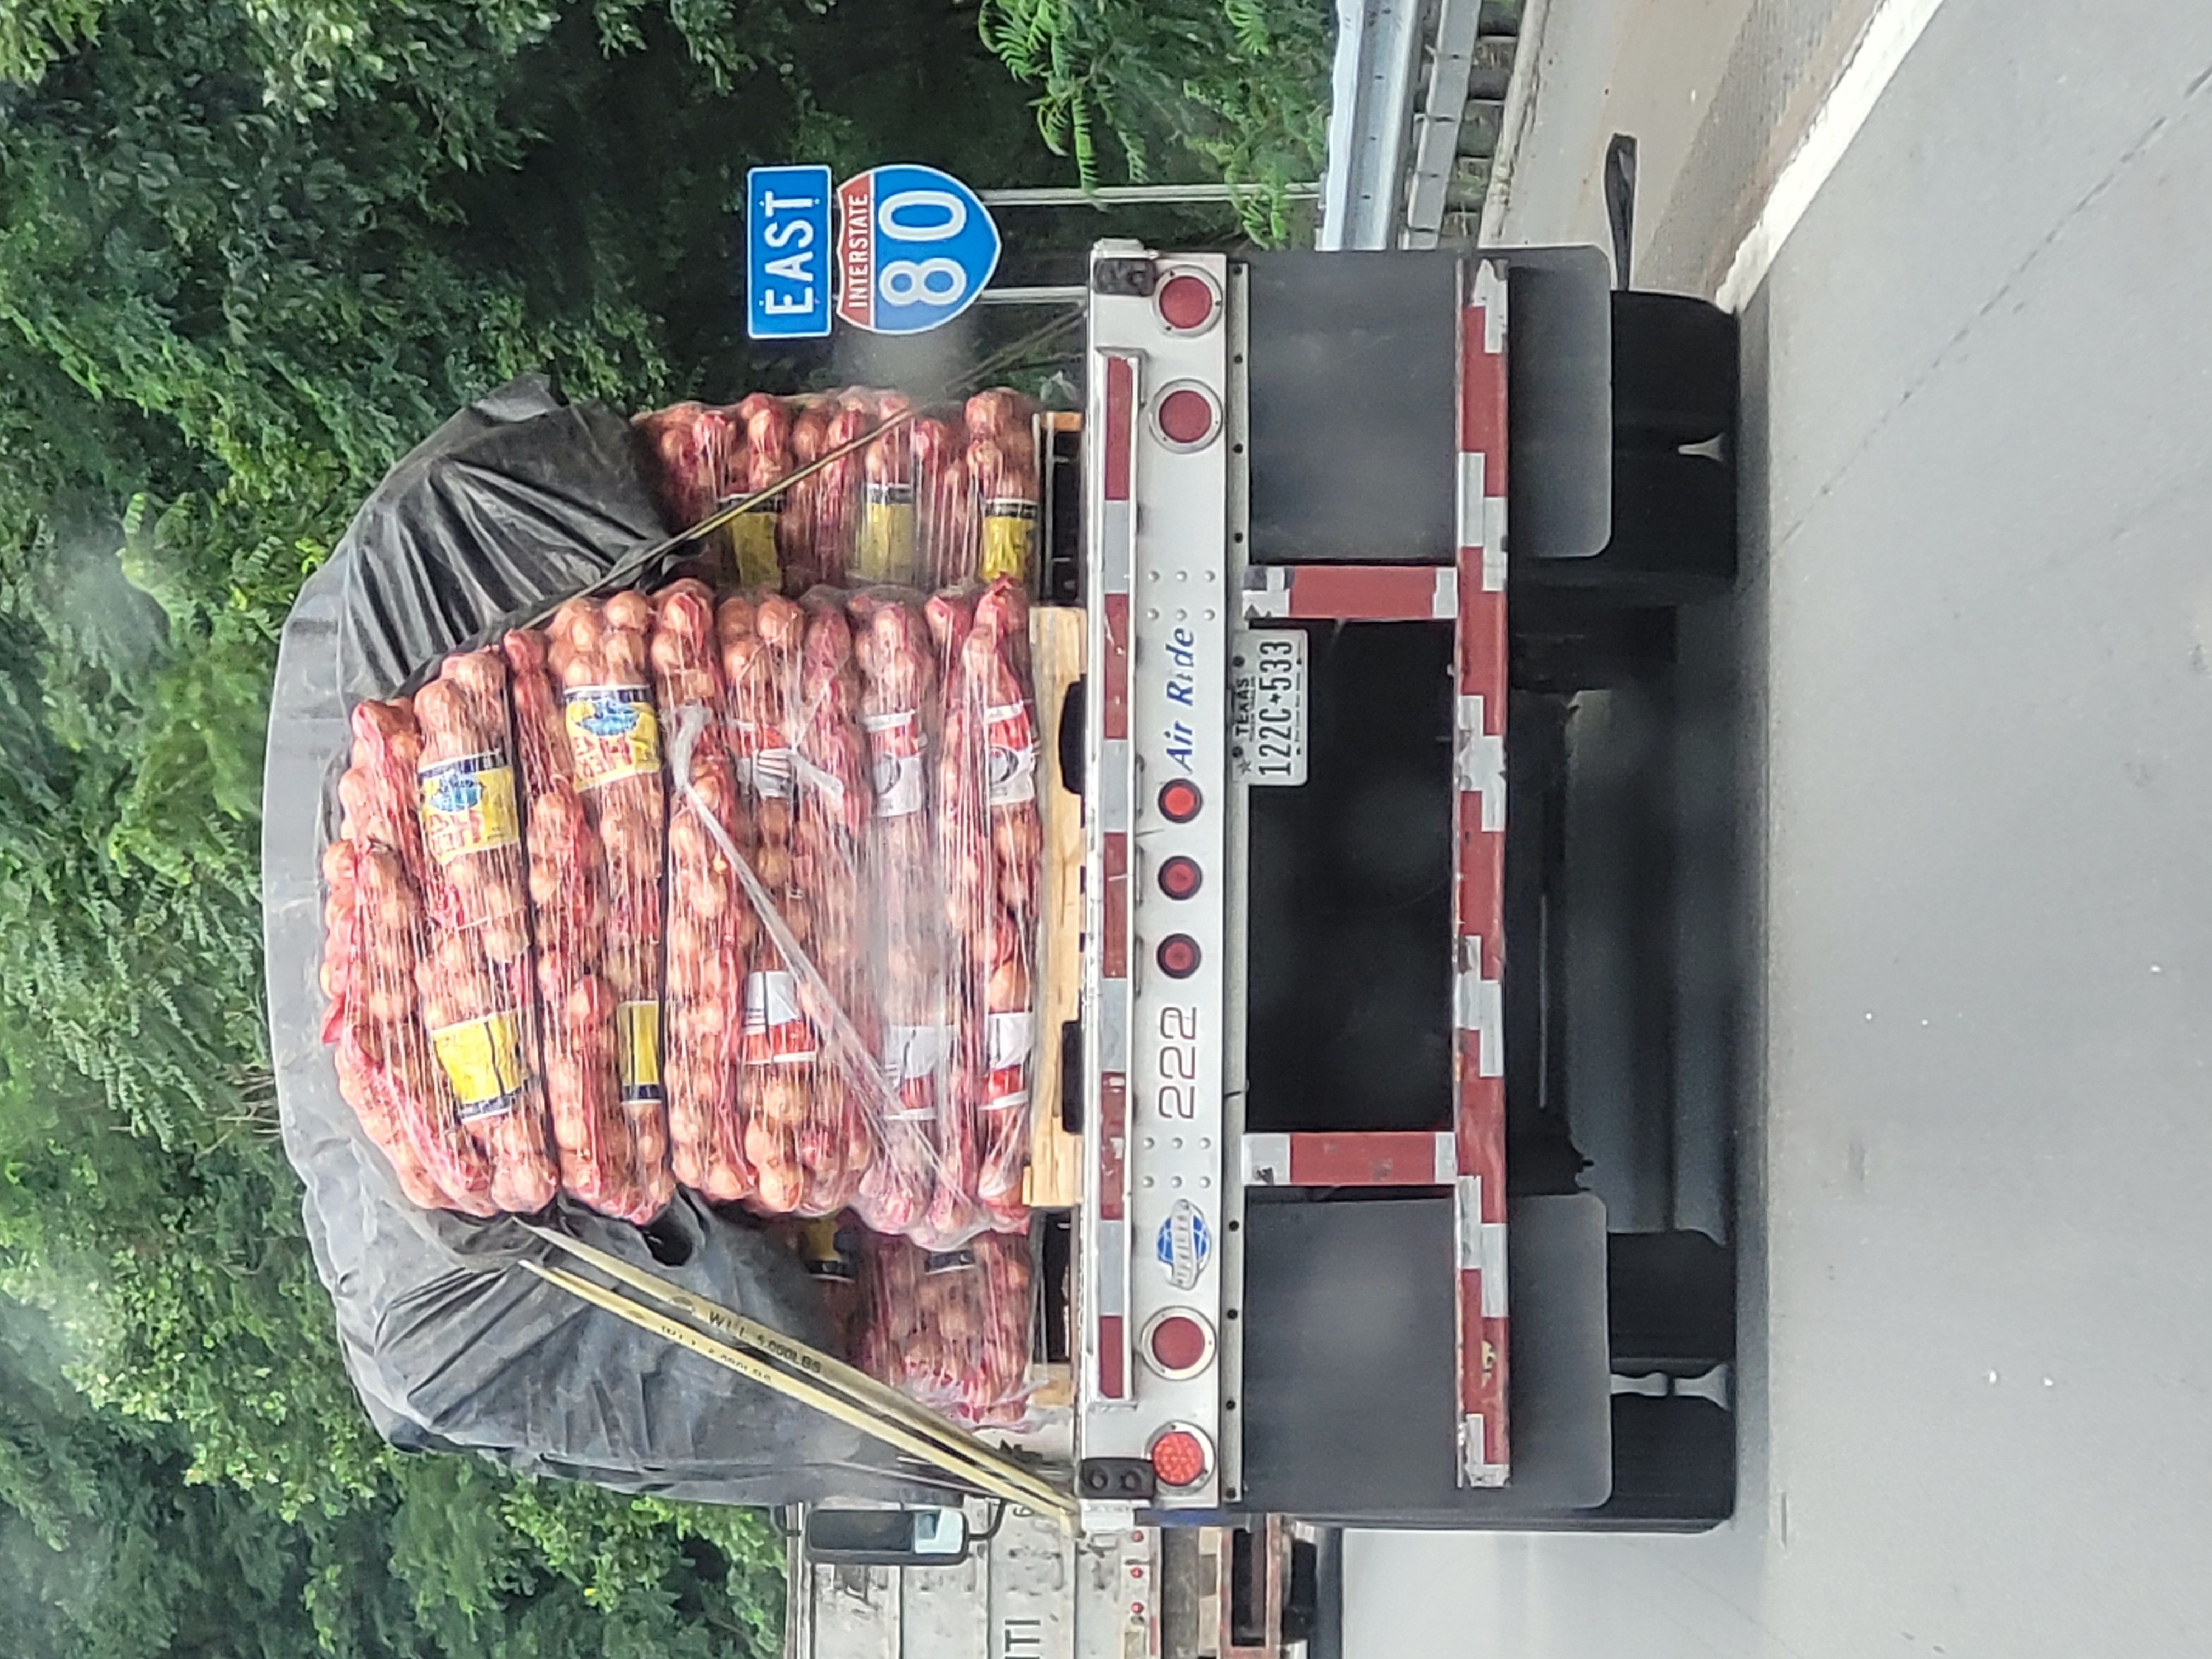 Truck with nothing but onions